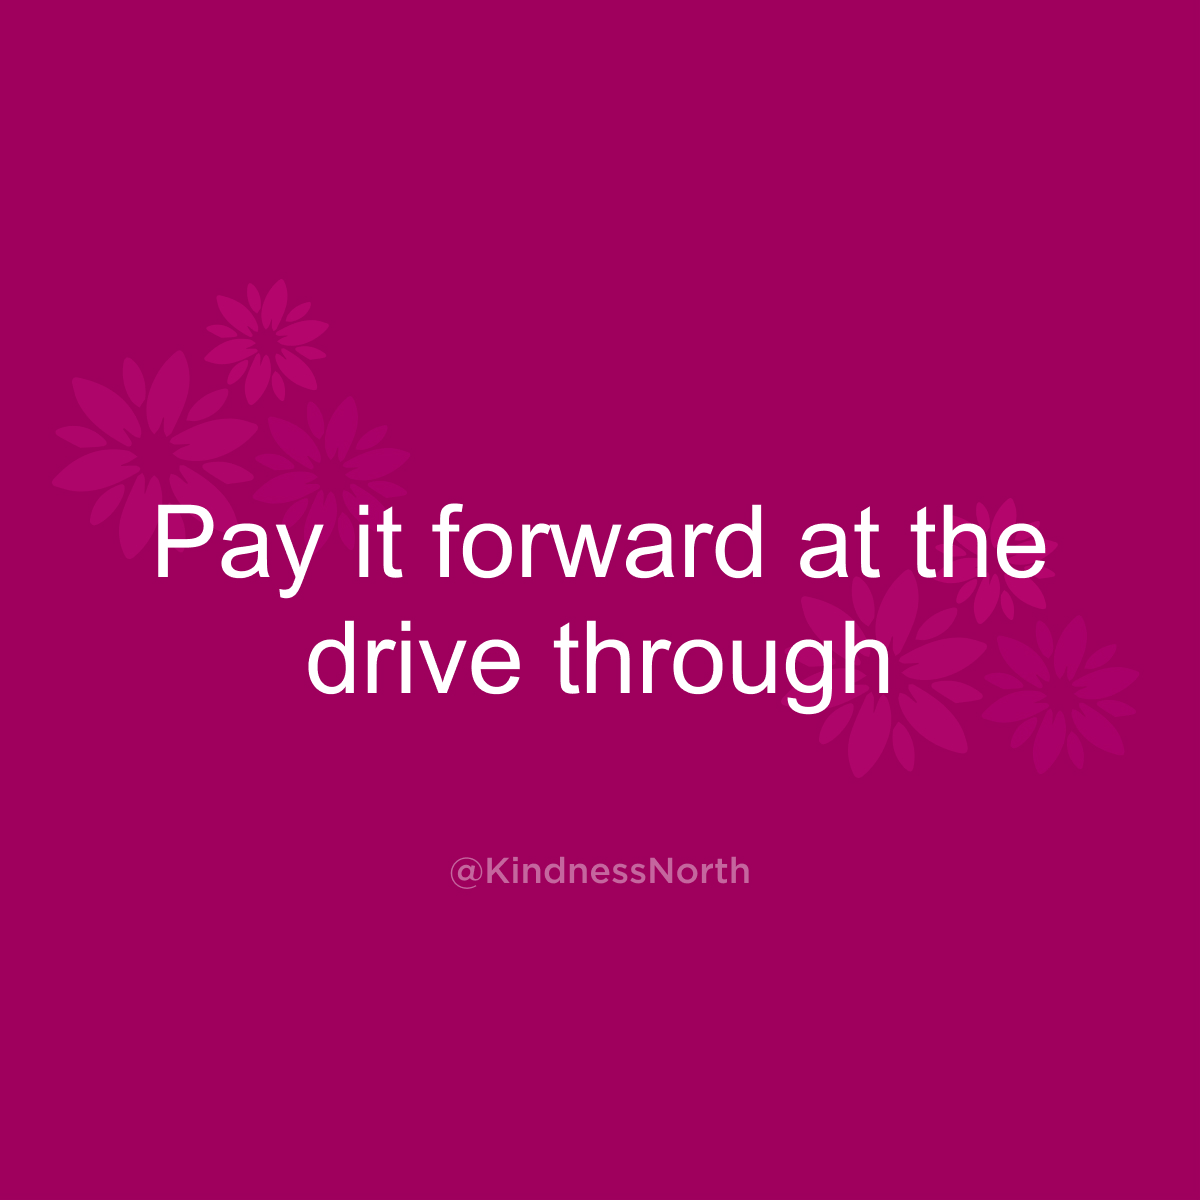 Pay it forward at the drive through